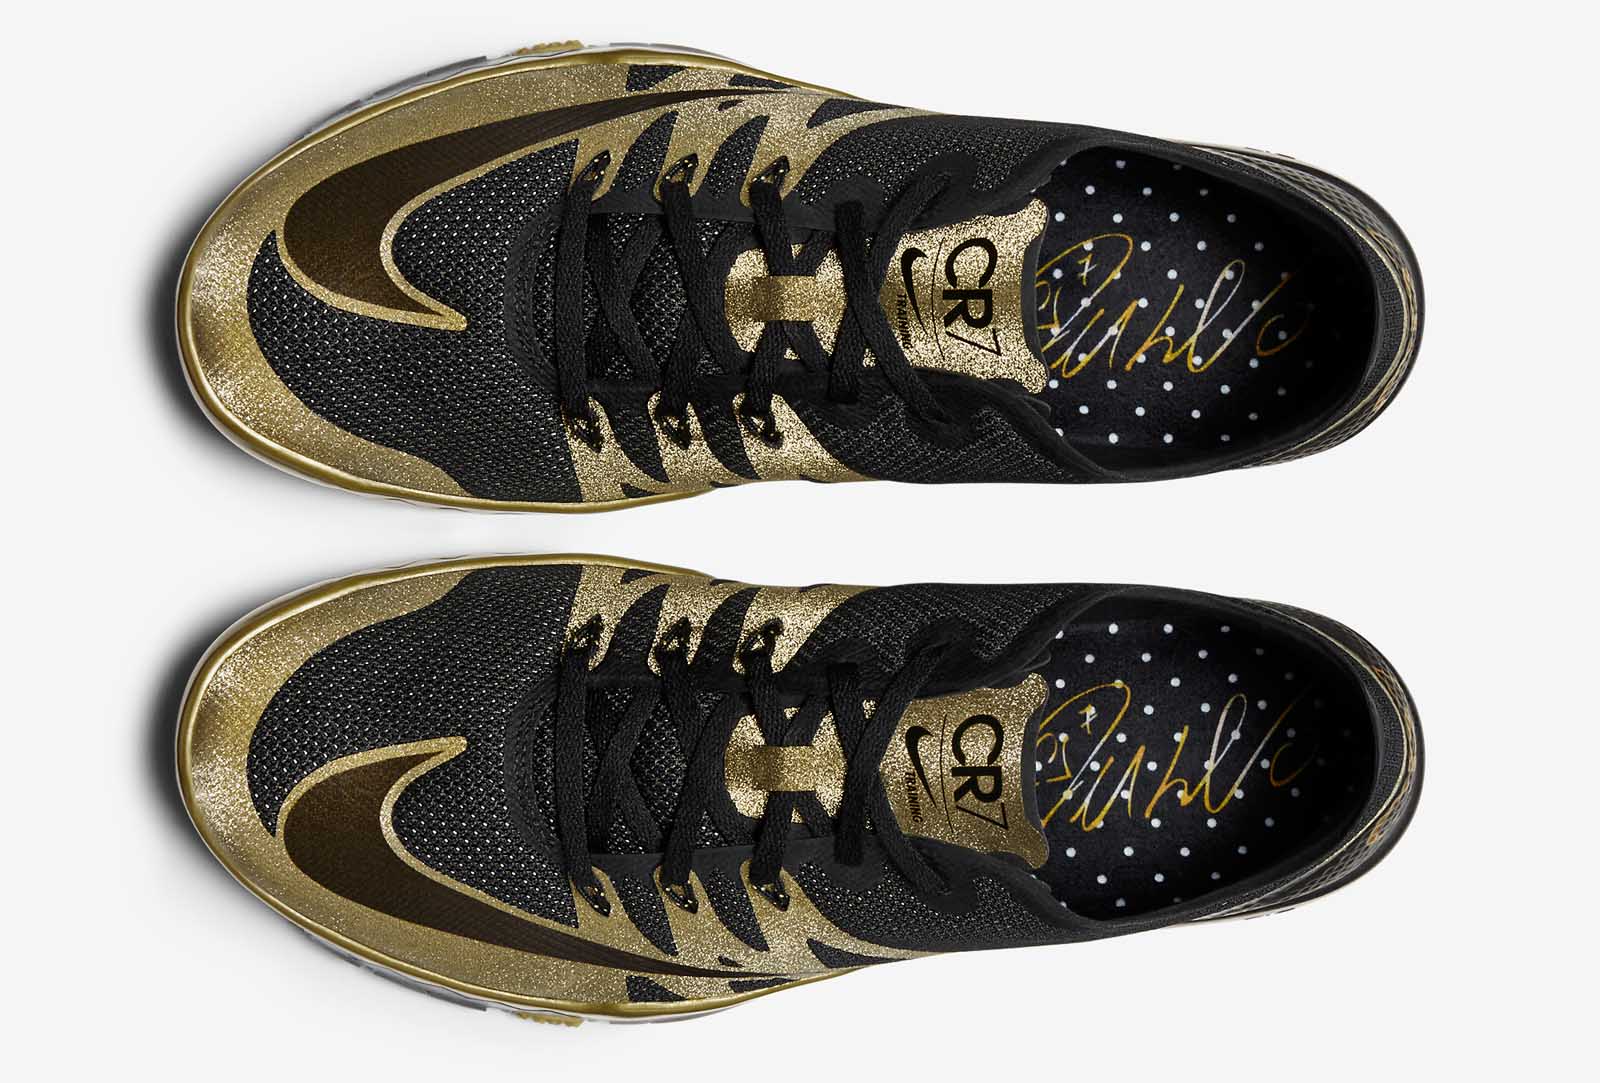 Black / Gold Nike Free Trainer Ronaldo Shoes Released - Footy